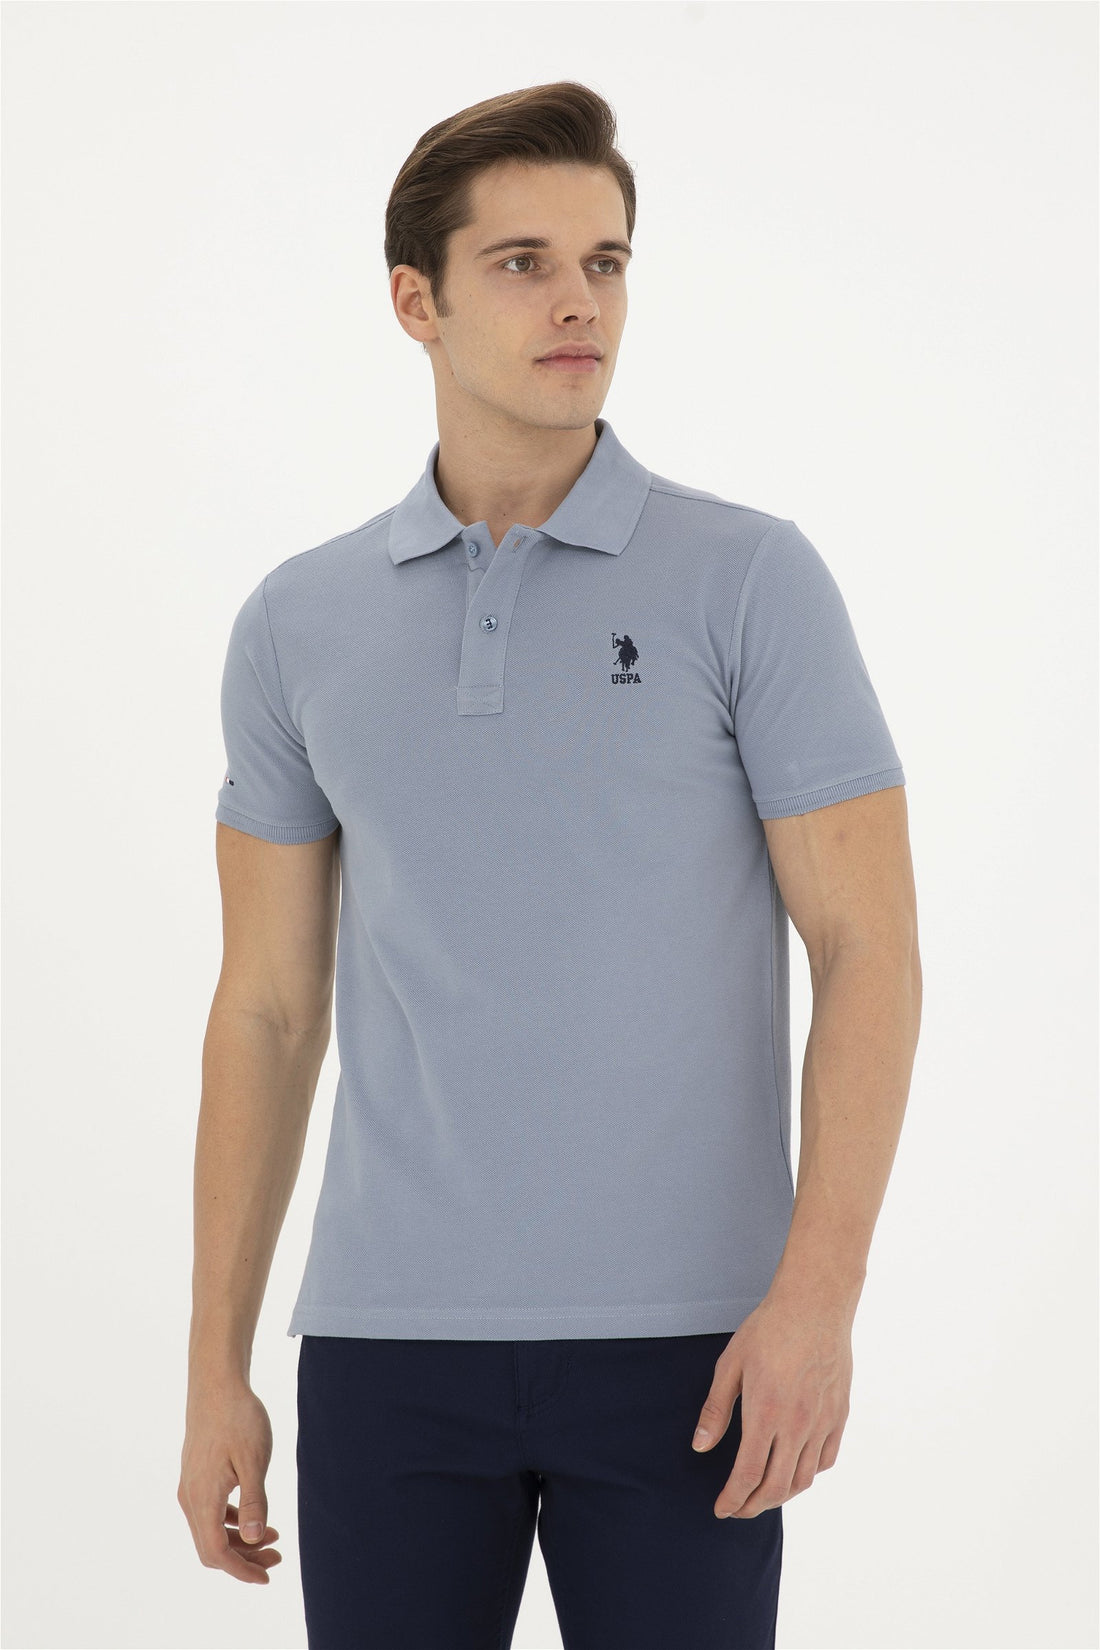 Polo Shirt With Chest Logo_G081SZ0110 1794860_VR028_01